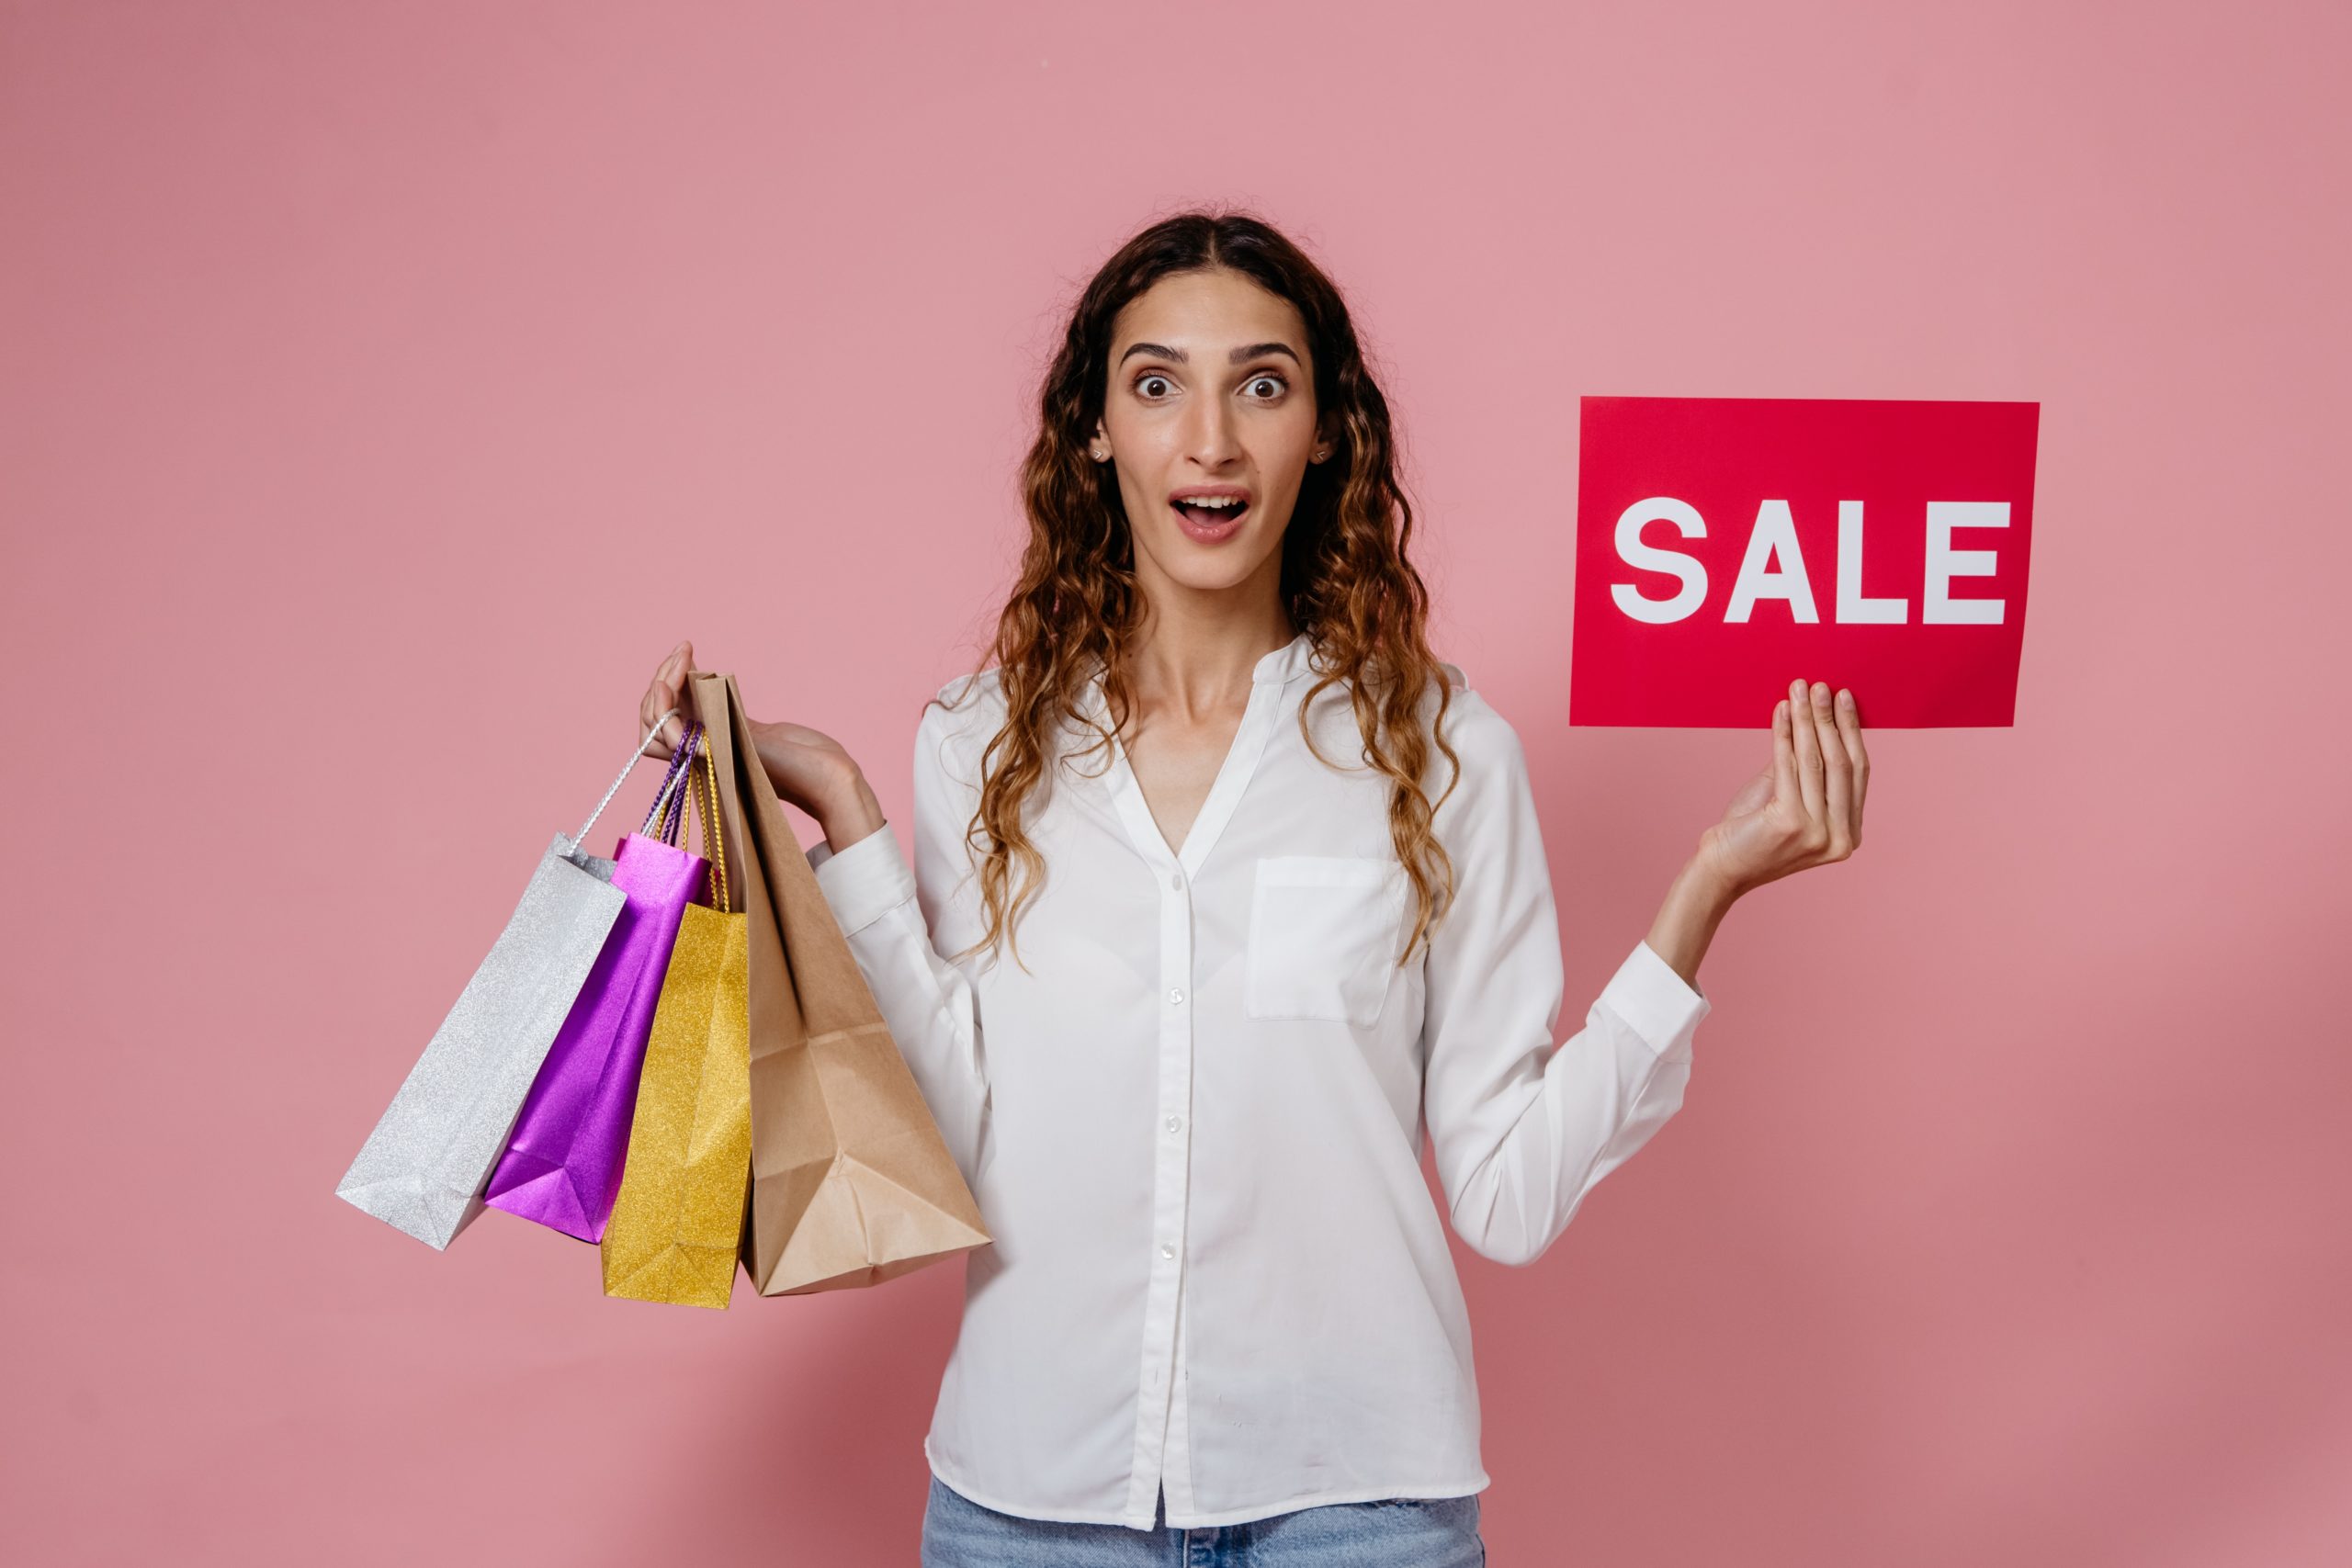 Woman holding 4 shopping bags and Sale sign with surprised look